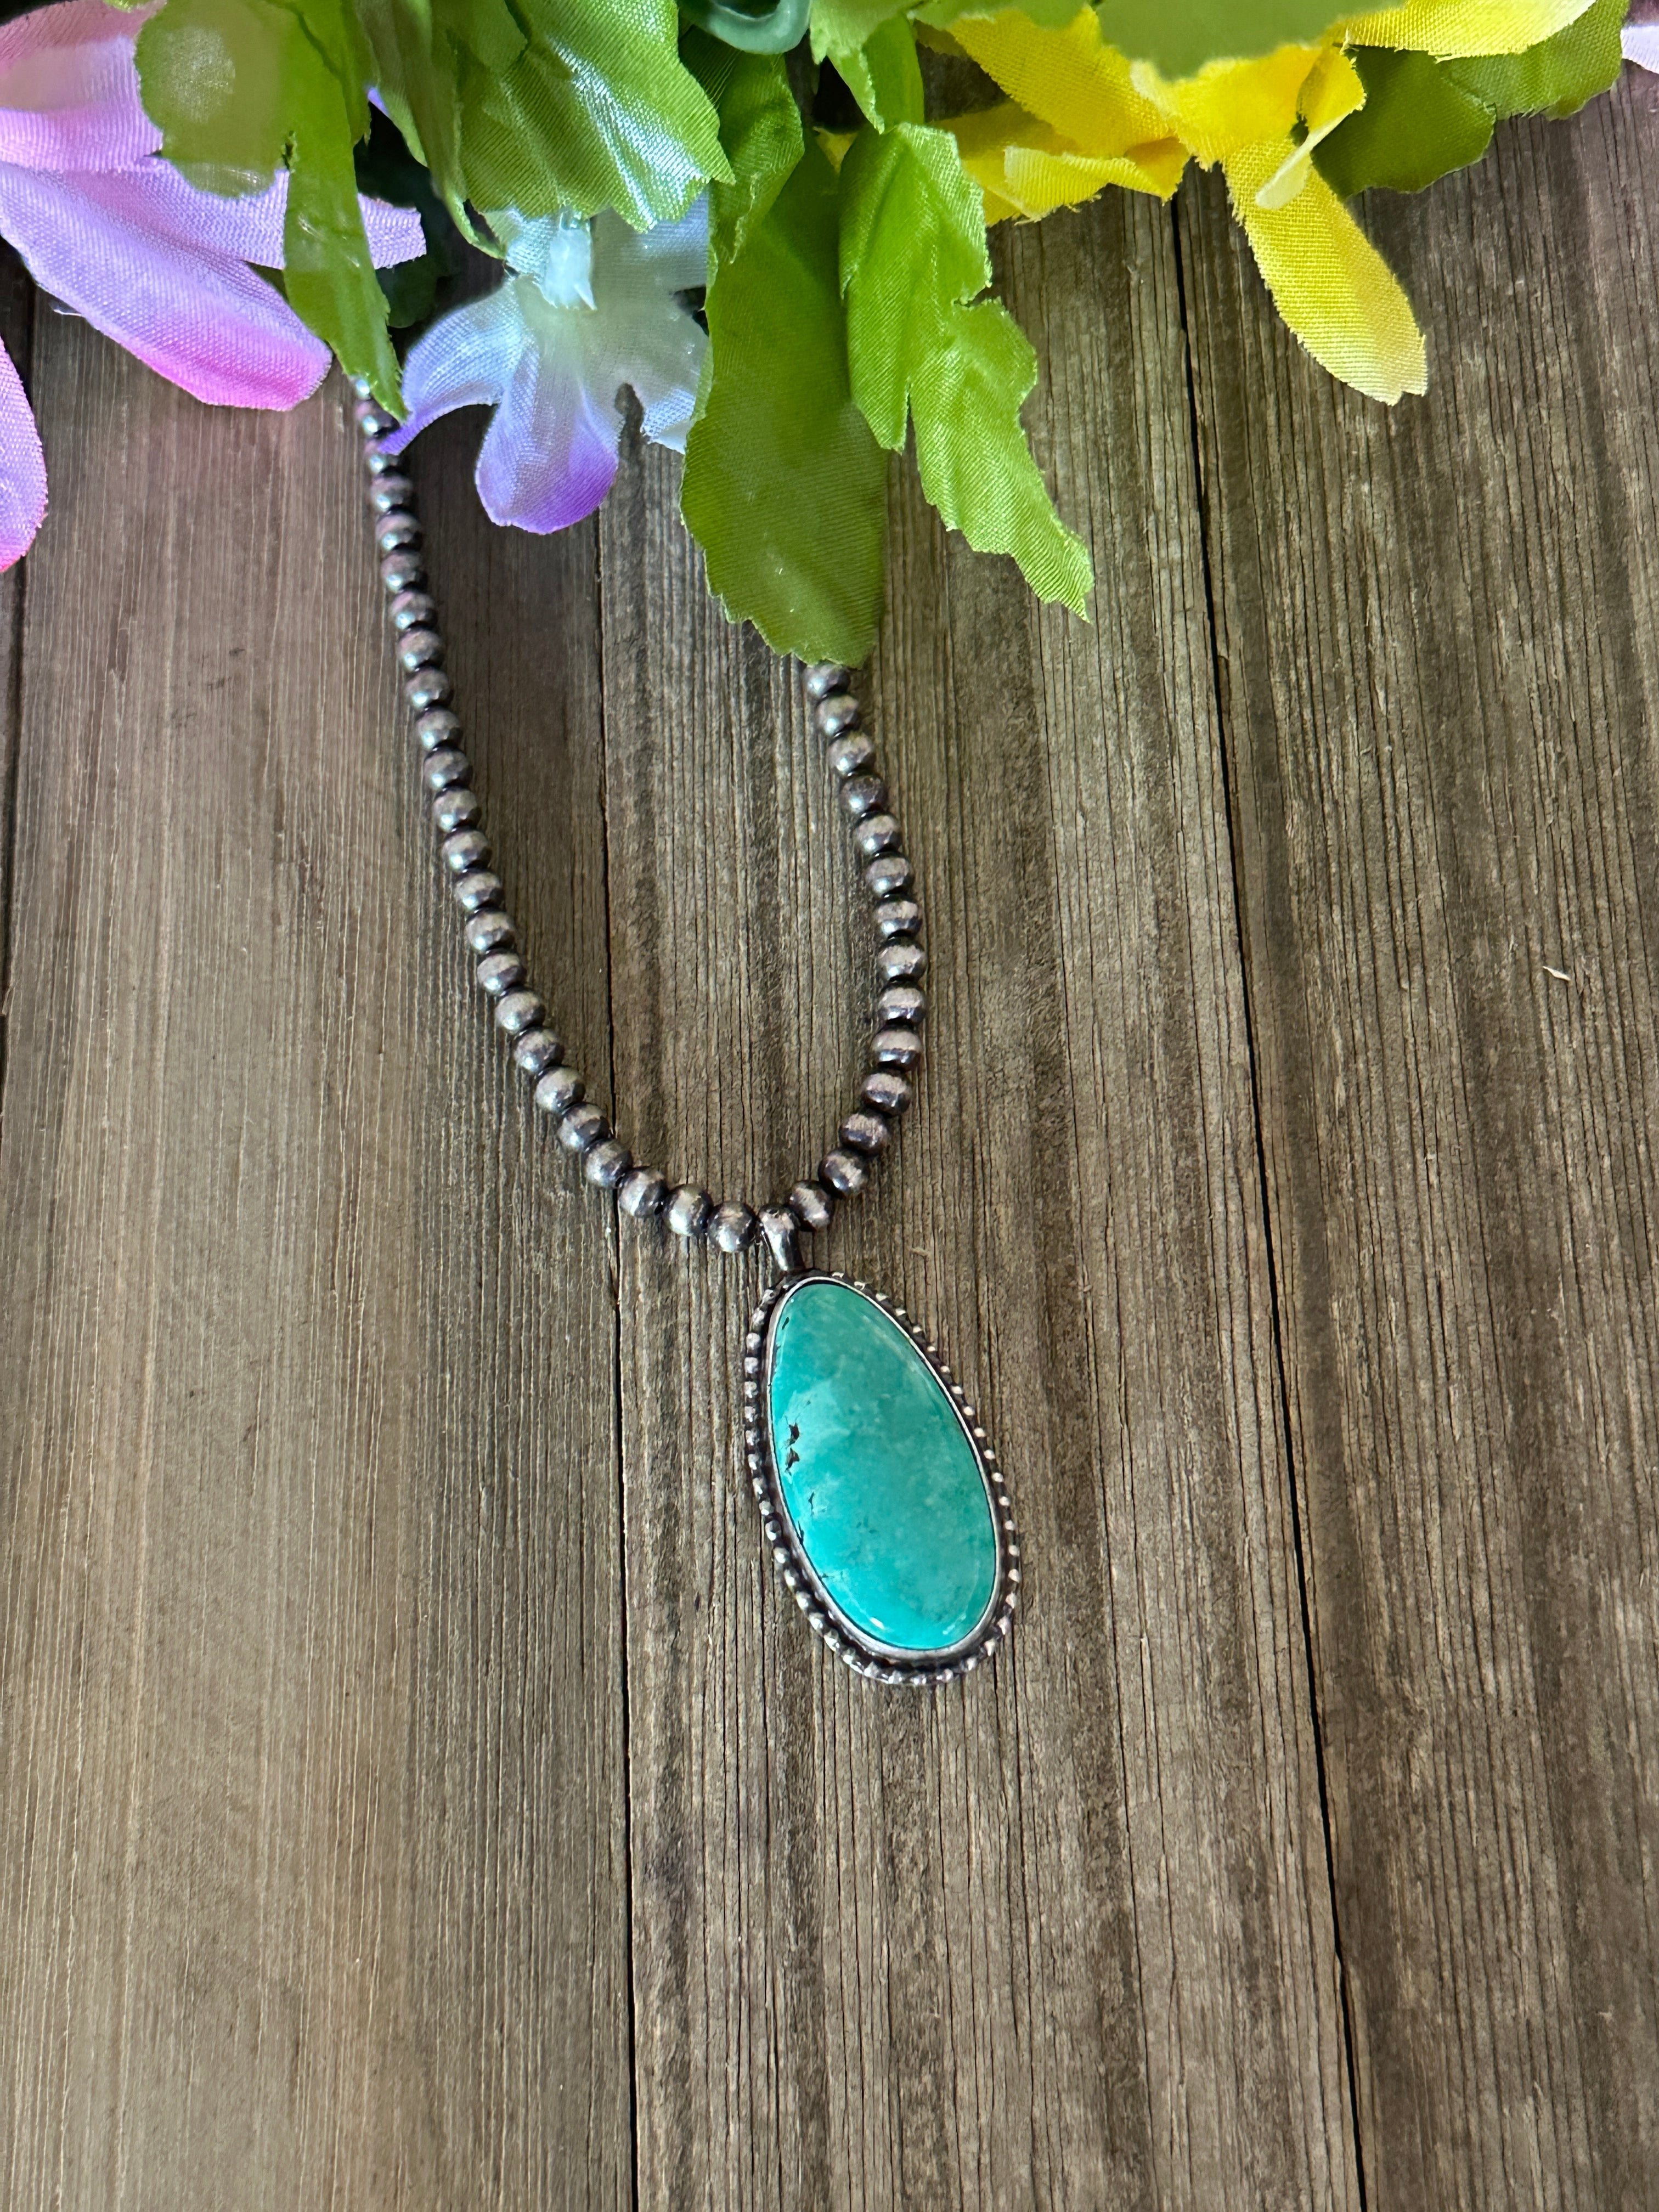 Tony Skeets Kingman Turquoise & Sterling Silver Necklace